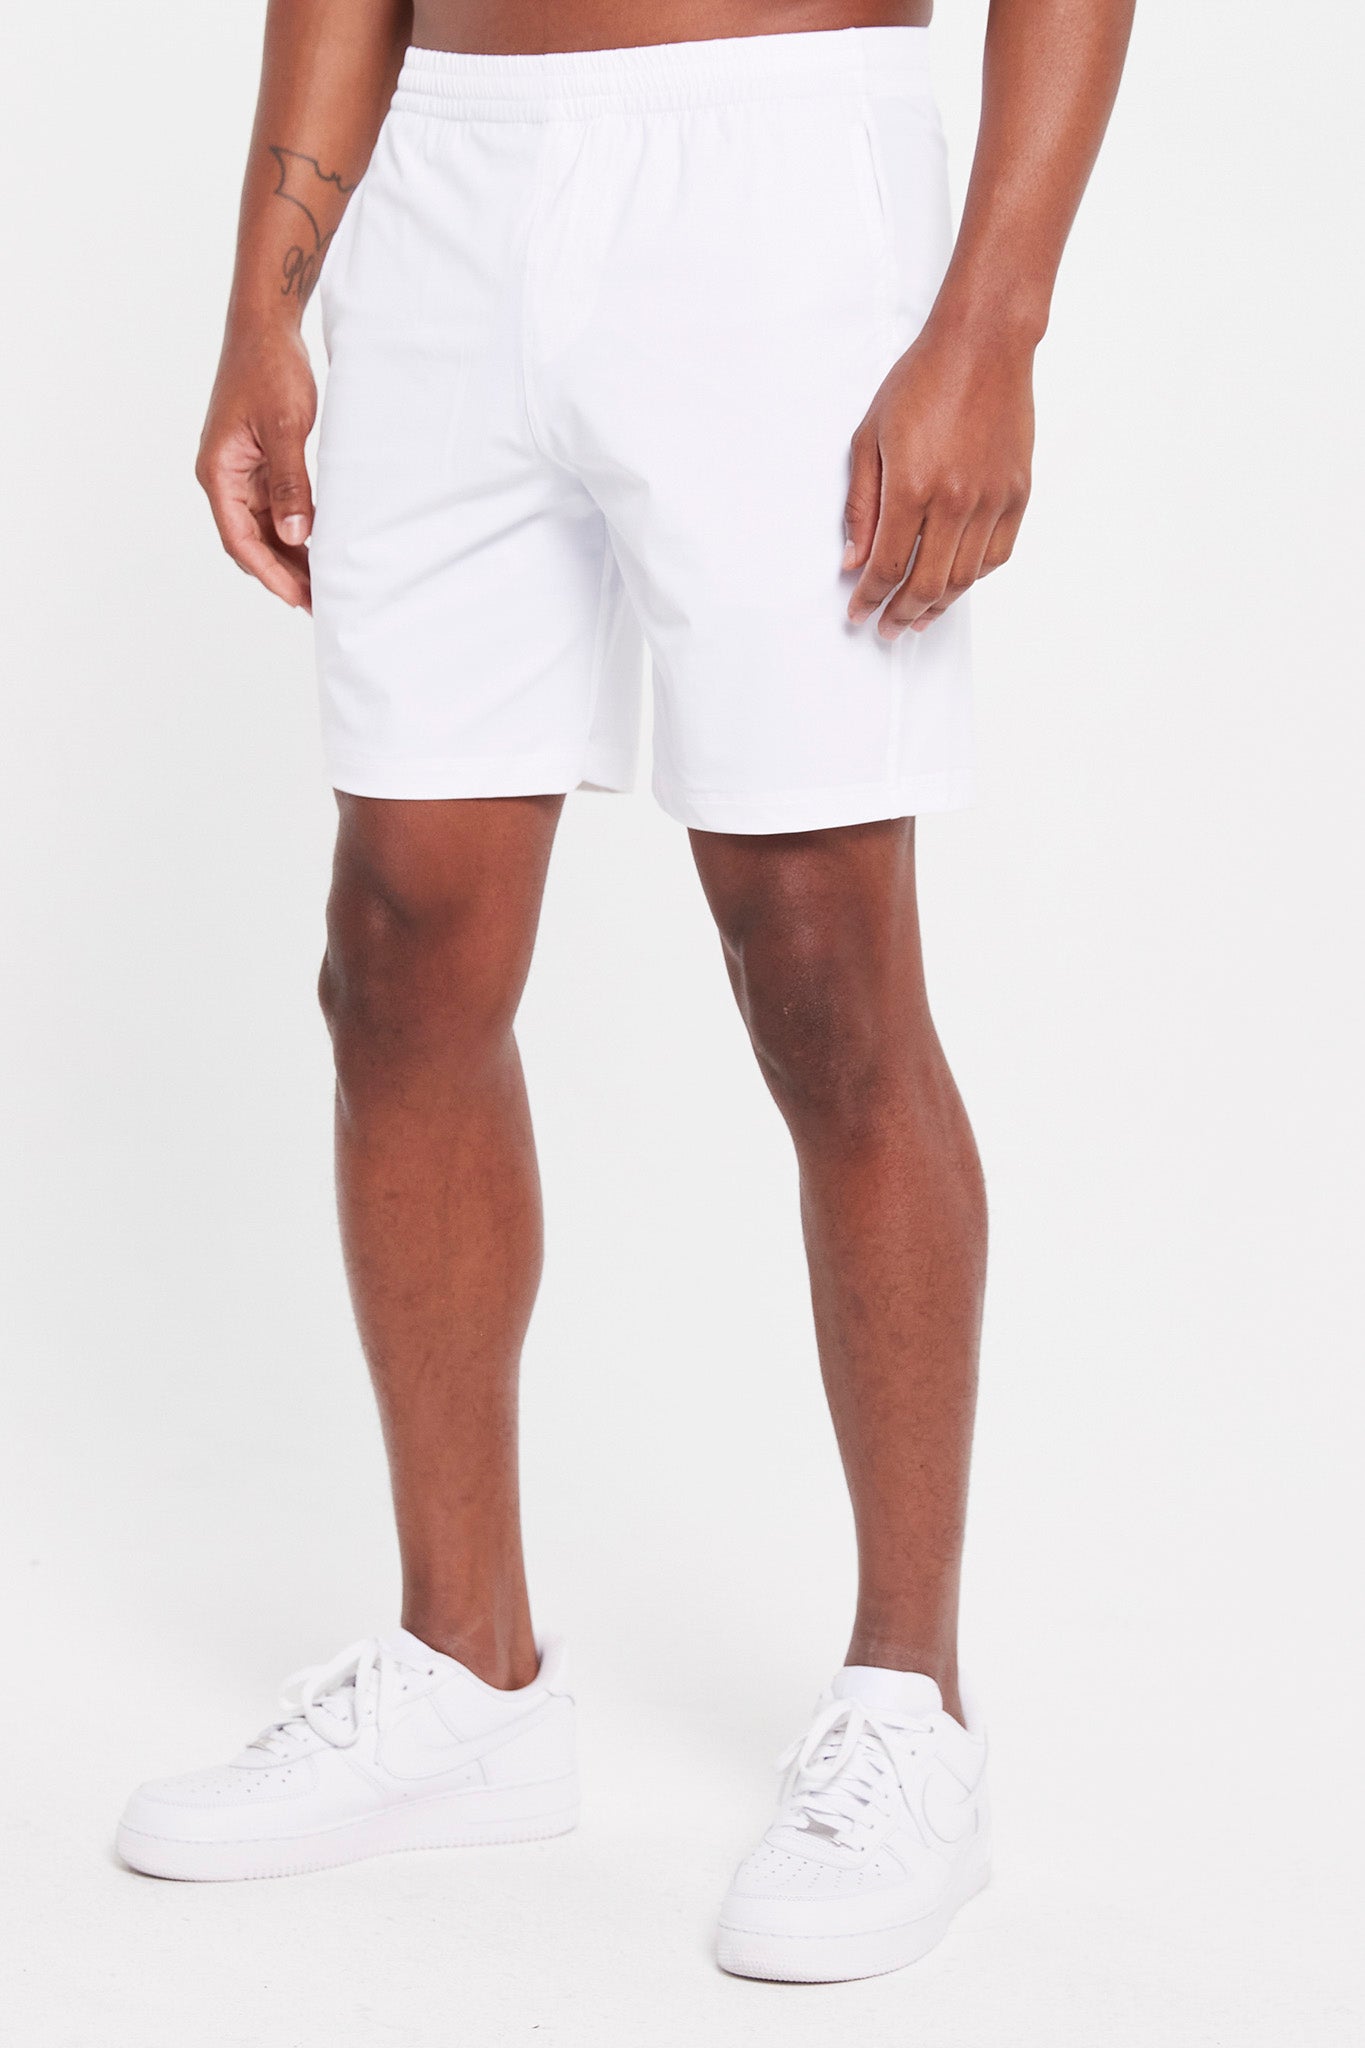 Image of the byron tennis short in bright white